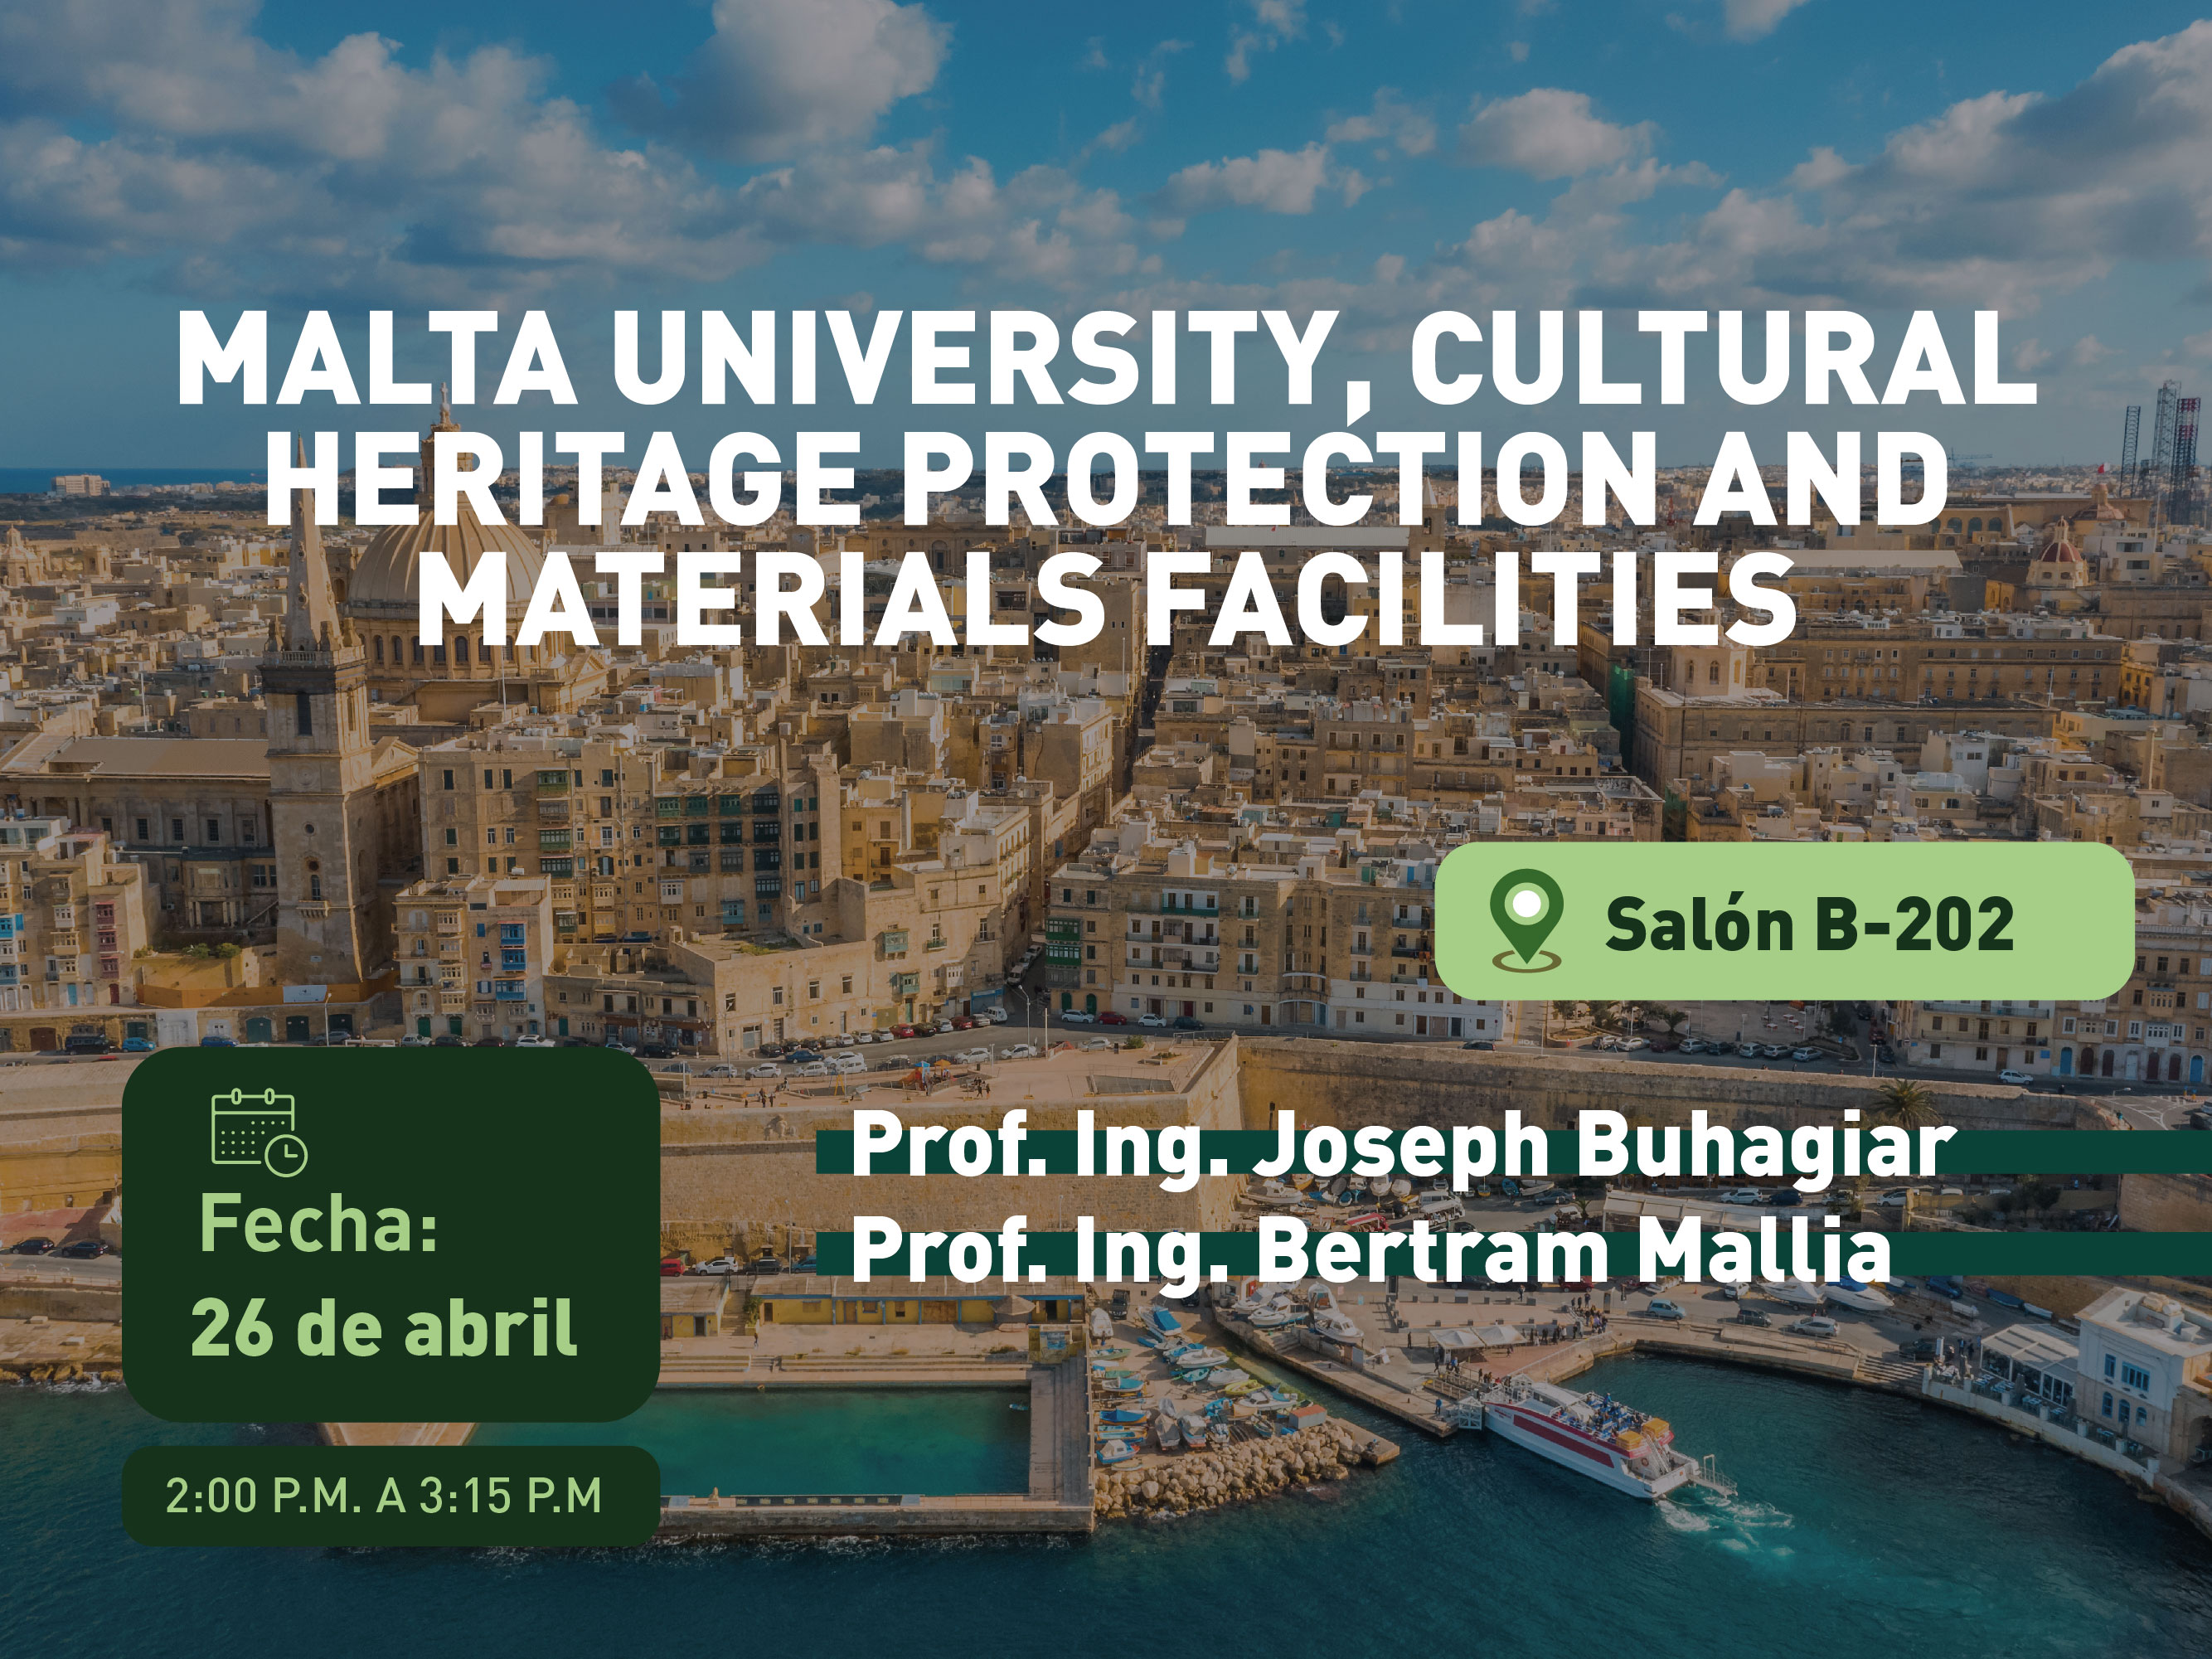 Malta University, Cultural Heritage Protection and Materials Facilities